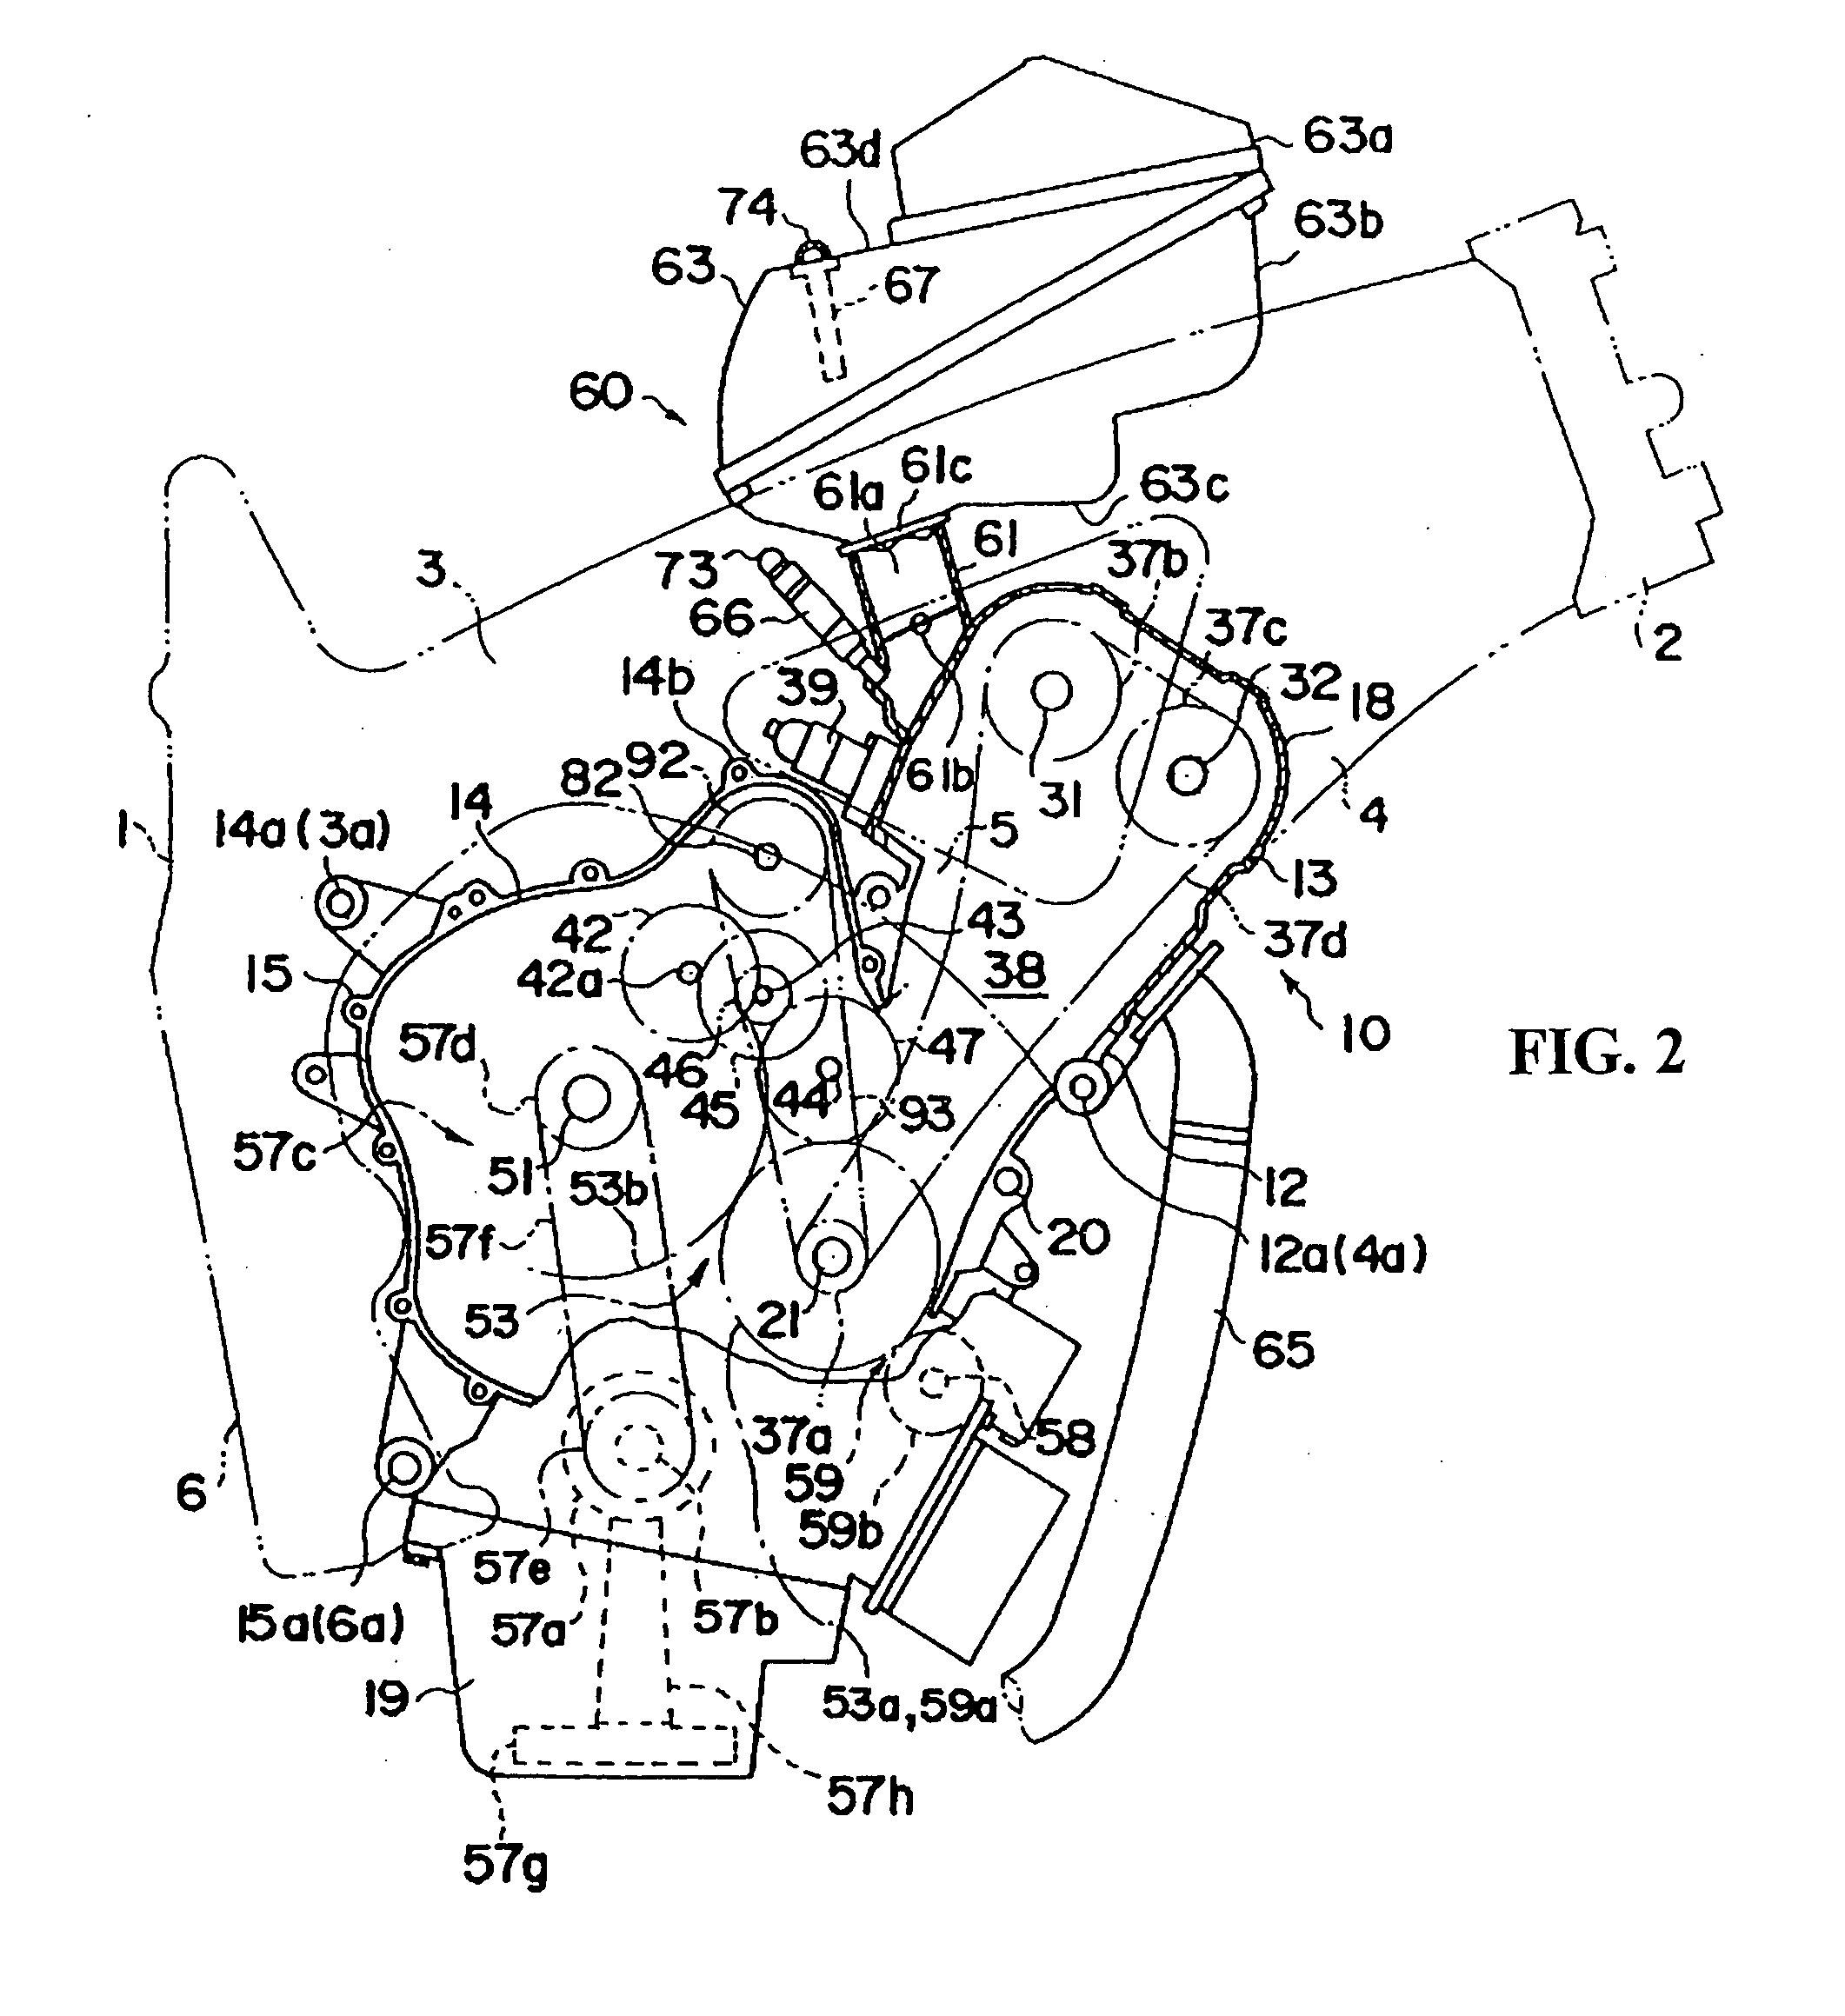 Internal combustion engine having improved fuel pump configuration, and vehicle including same